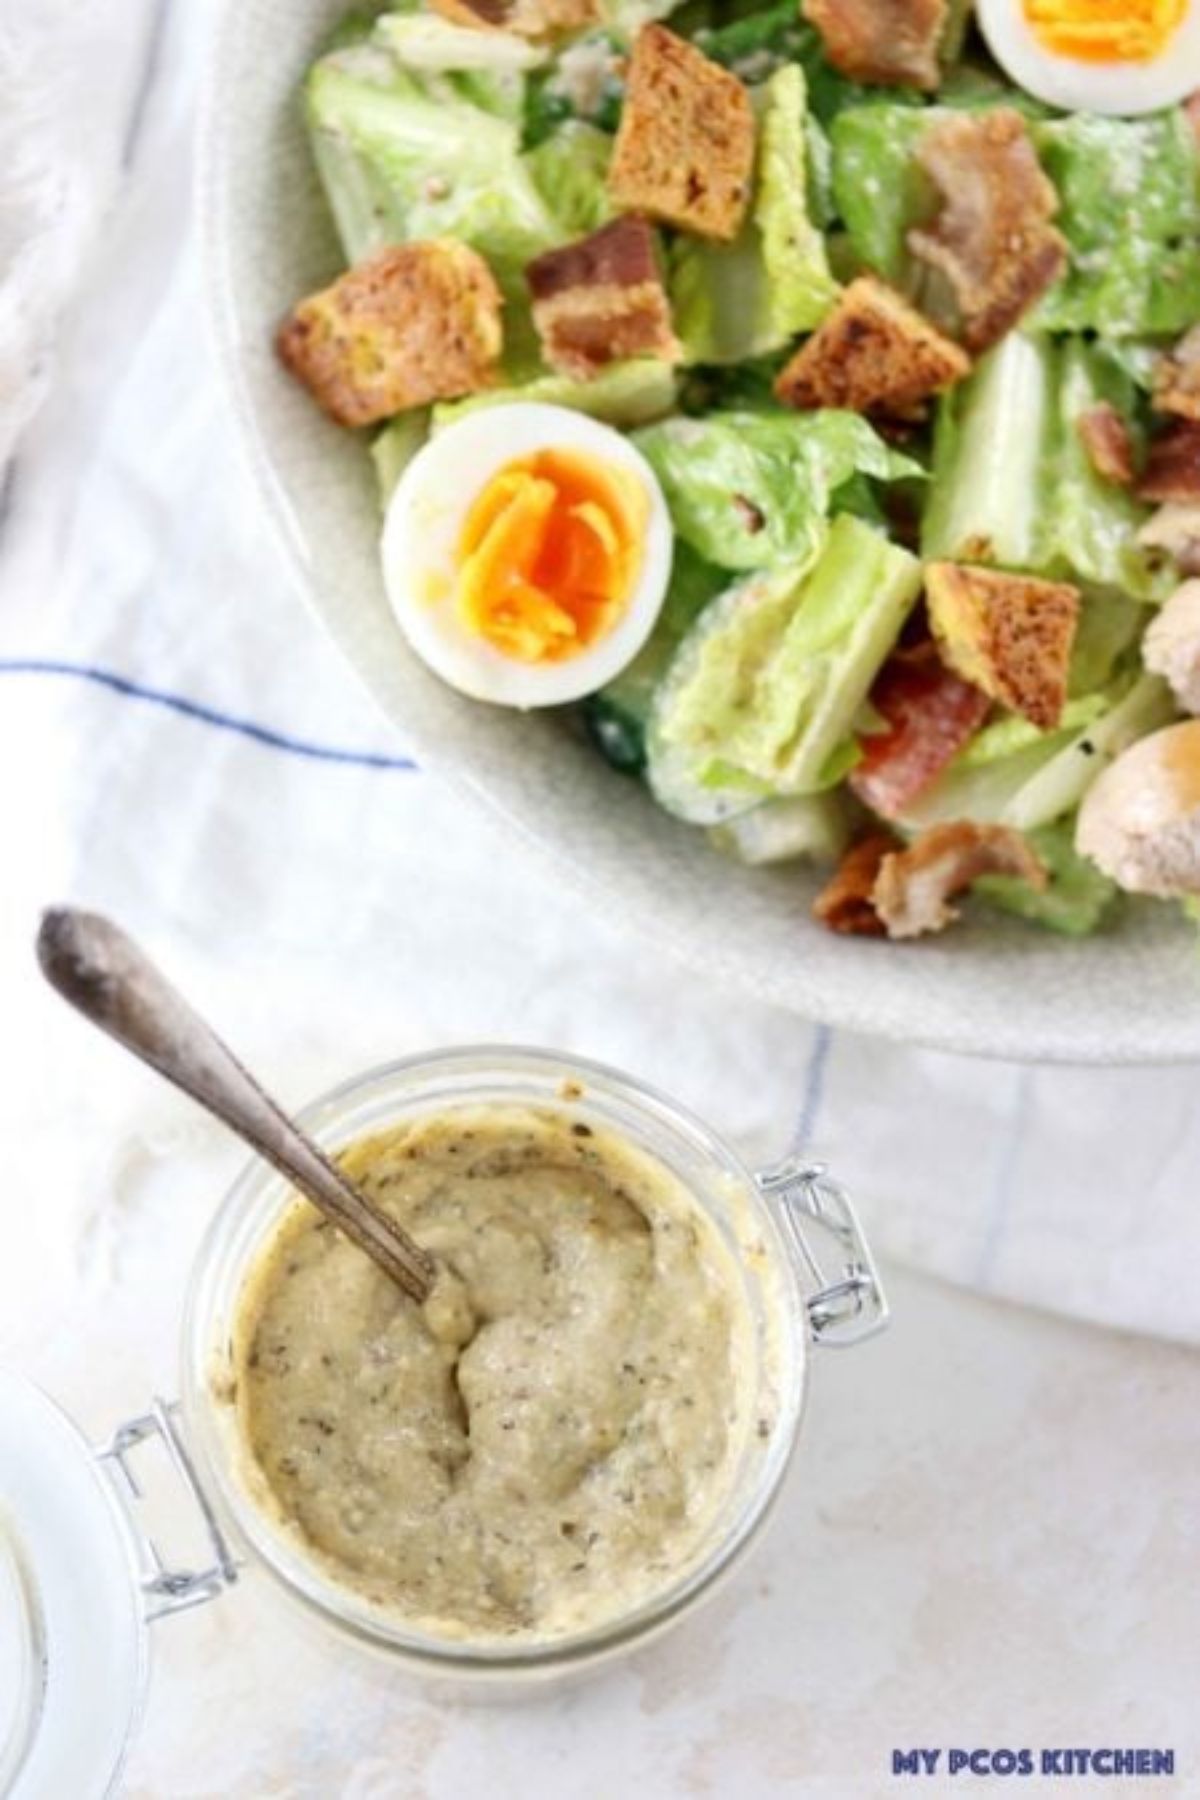 A glass jar of thick cream y dressing with a spoon in it, in front of a bowl of salad